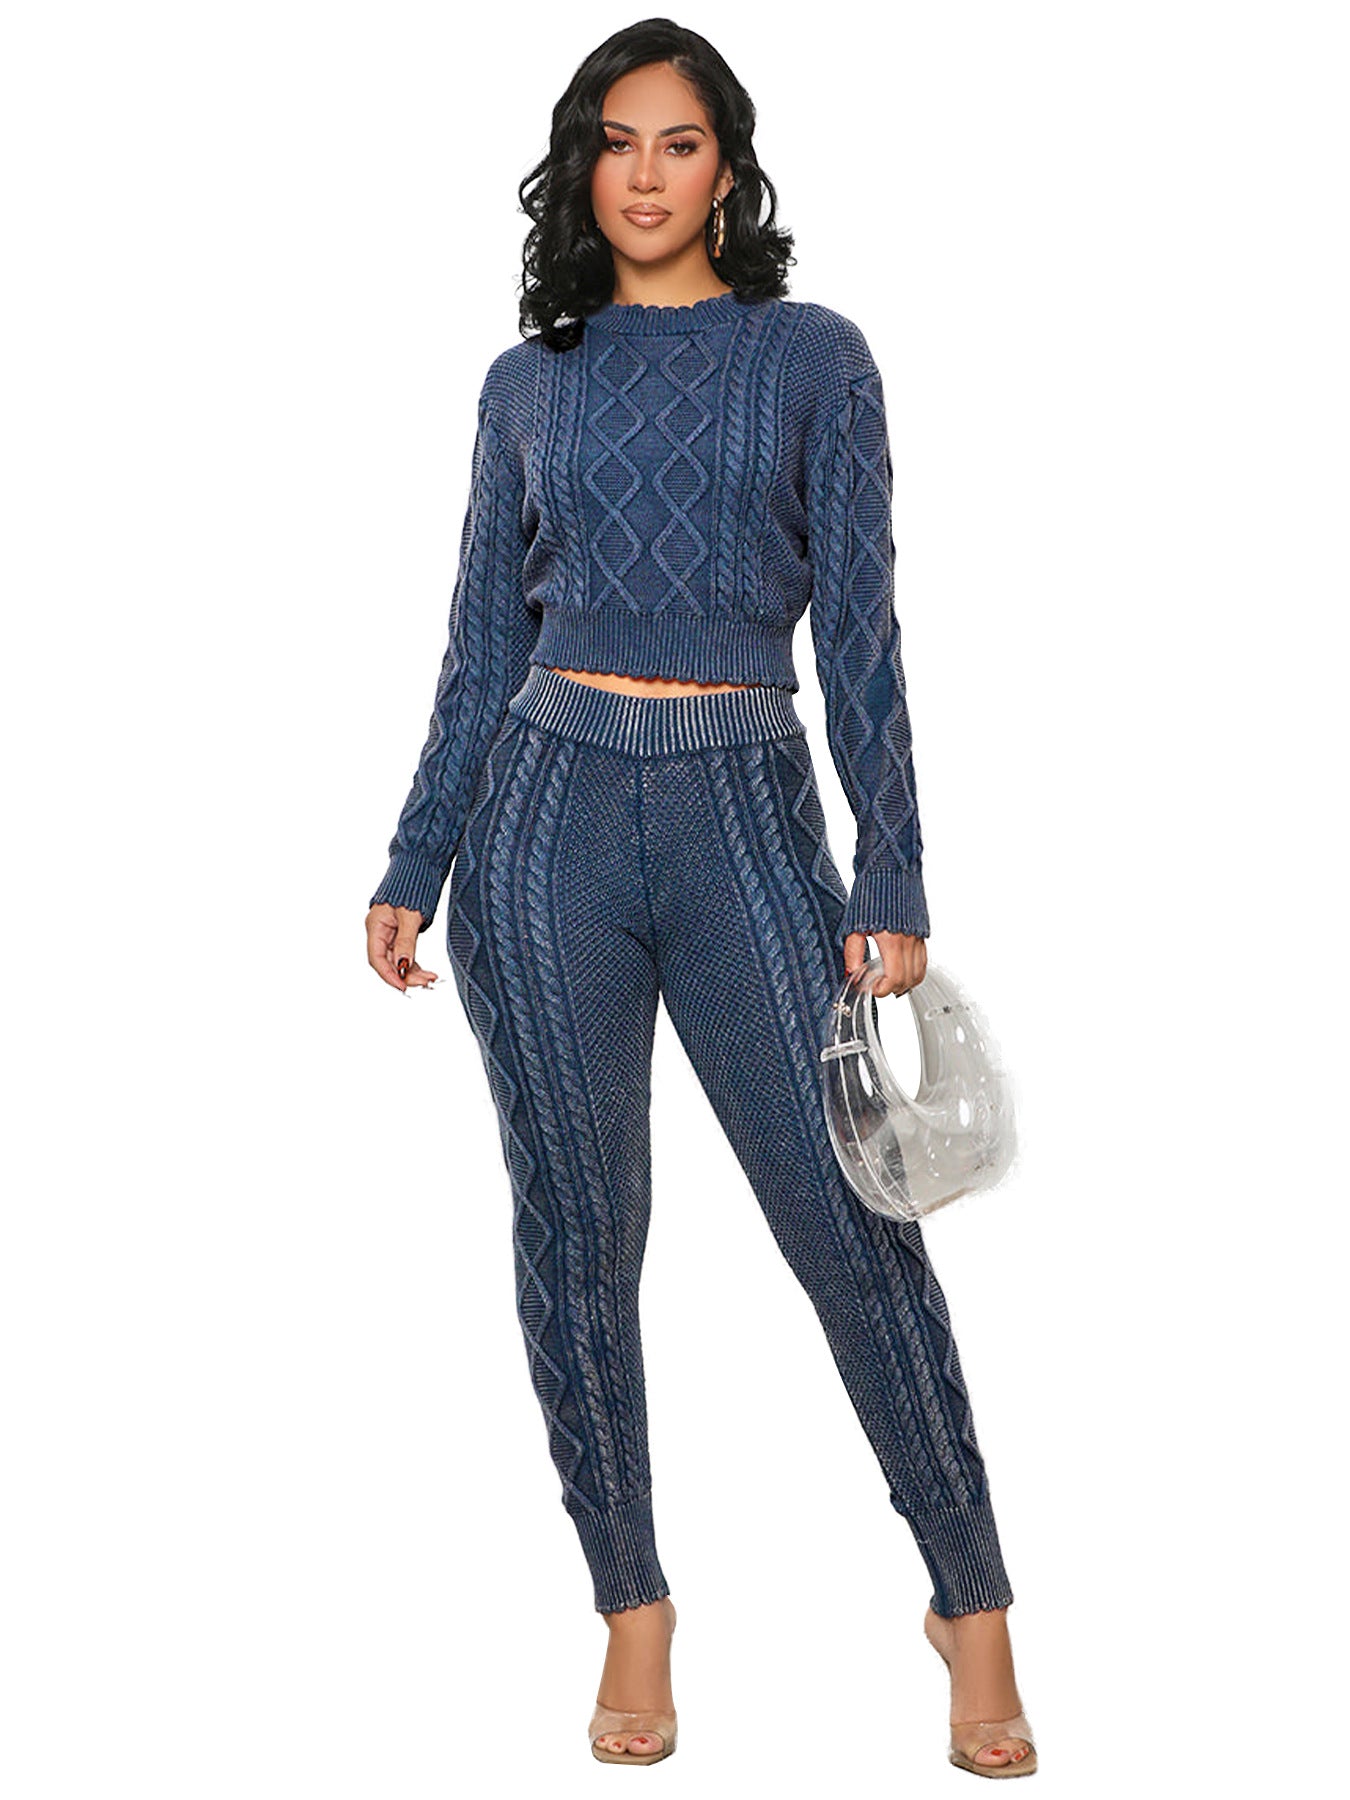 FZ Women's Washed Vintage Knitted Rhombus Plaid Cable Sweater Pants Suit